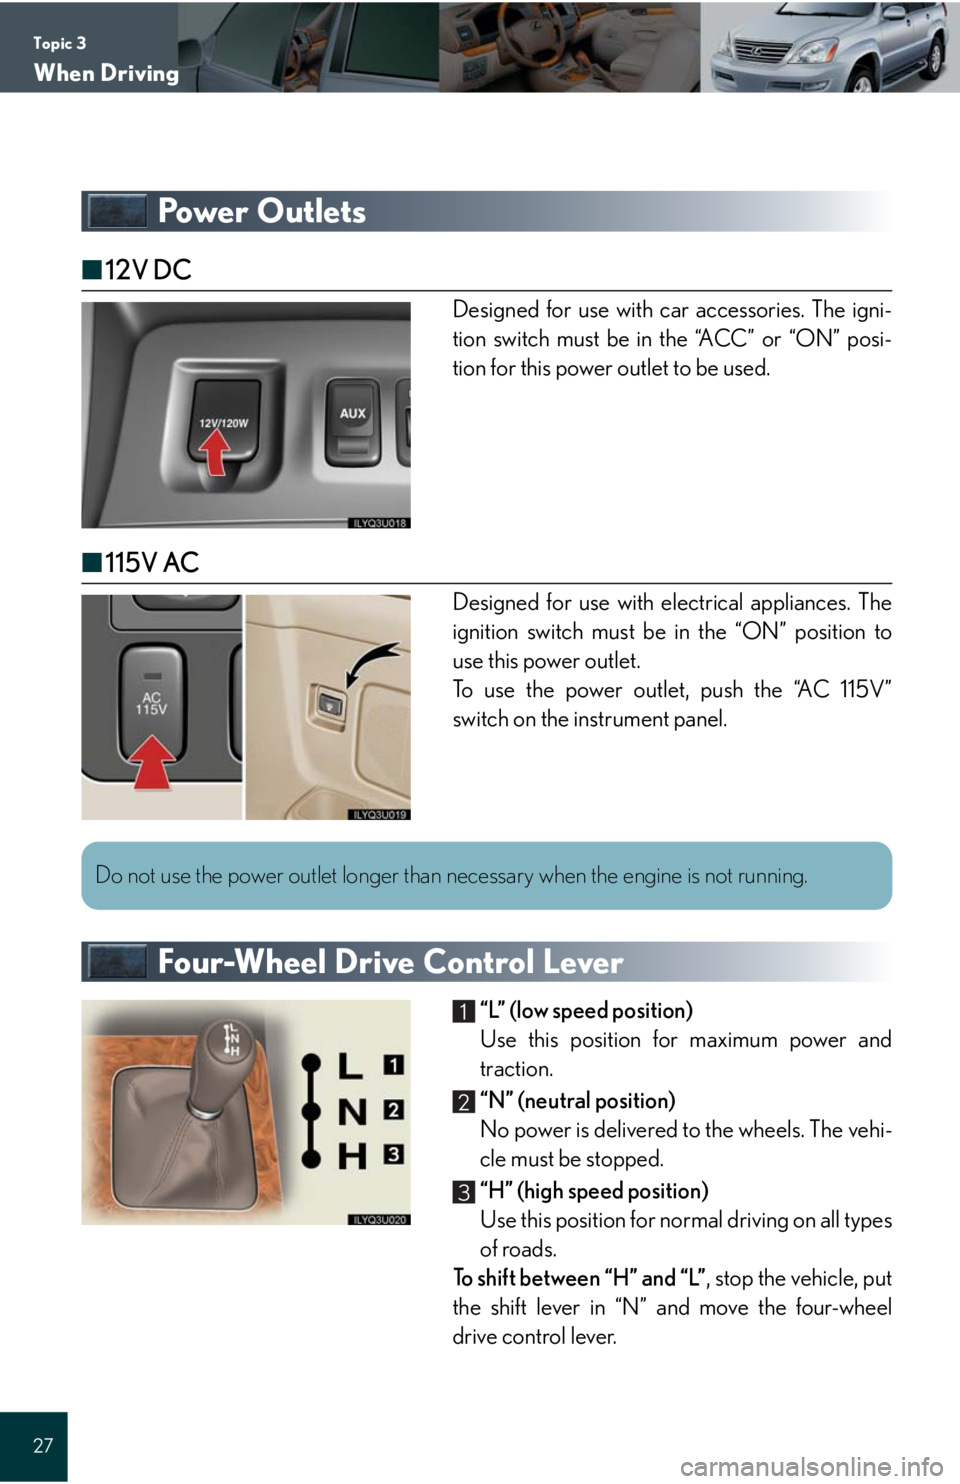 Lexus GX470 2008  Refueling / LEXUS 2008 GX470 QUICK GUIDE  (OM60D81U) Owners Guide Topic 3
When Driving
27
Powe r  O u t l e t s
■12V DC
Designed for use with car accessories. The igni-
tion switch must be in the “ACC” or “ON” posi-
tion for this power outlet to be used.
�